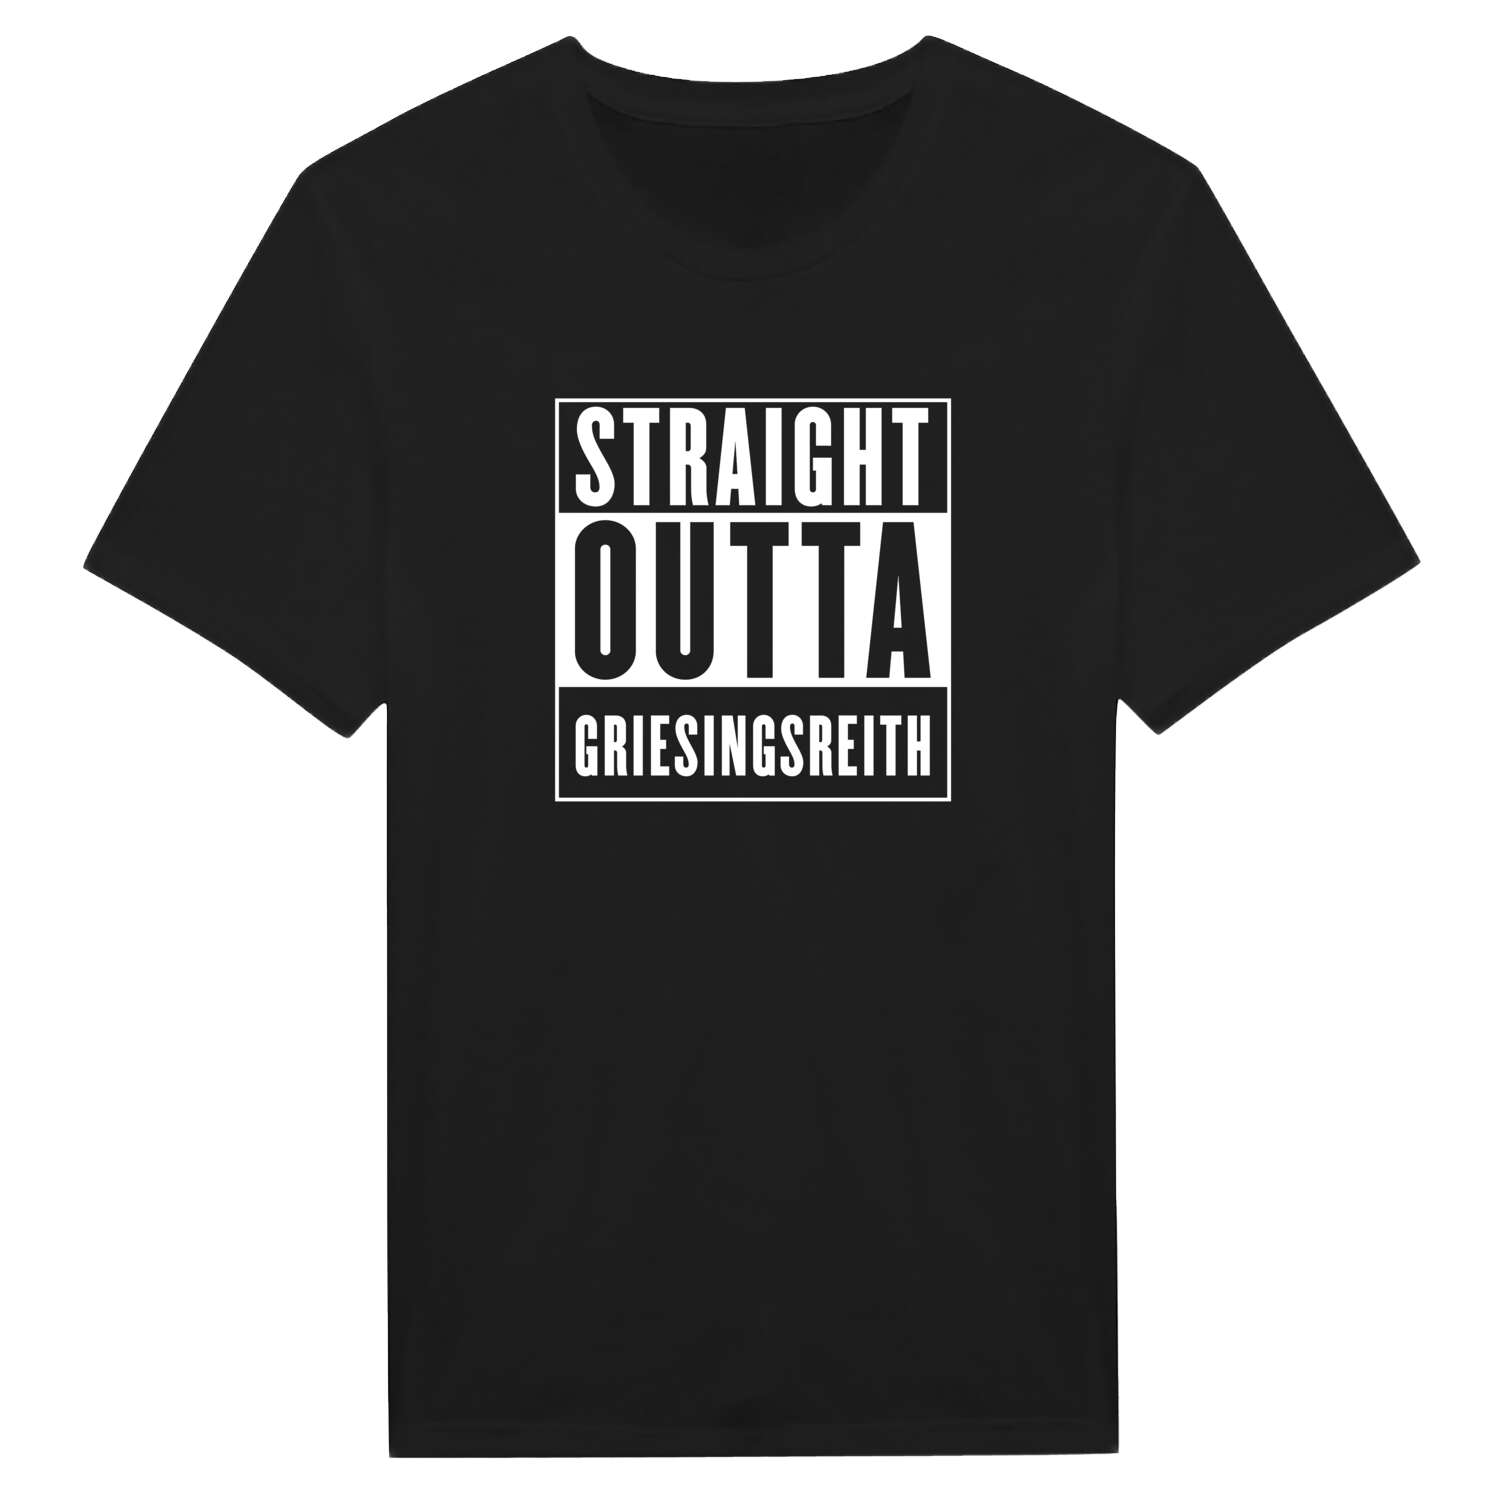 Griesingsreith T-Shirt »Straight Outta«